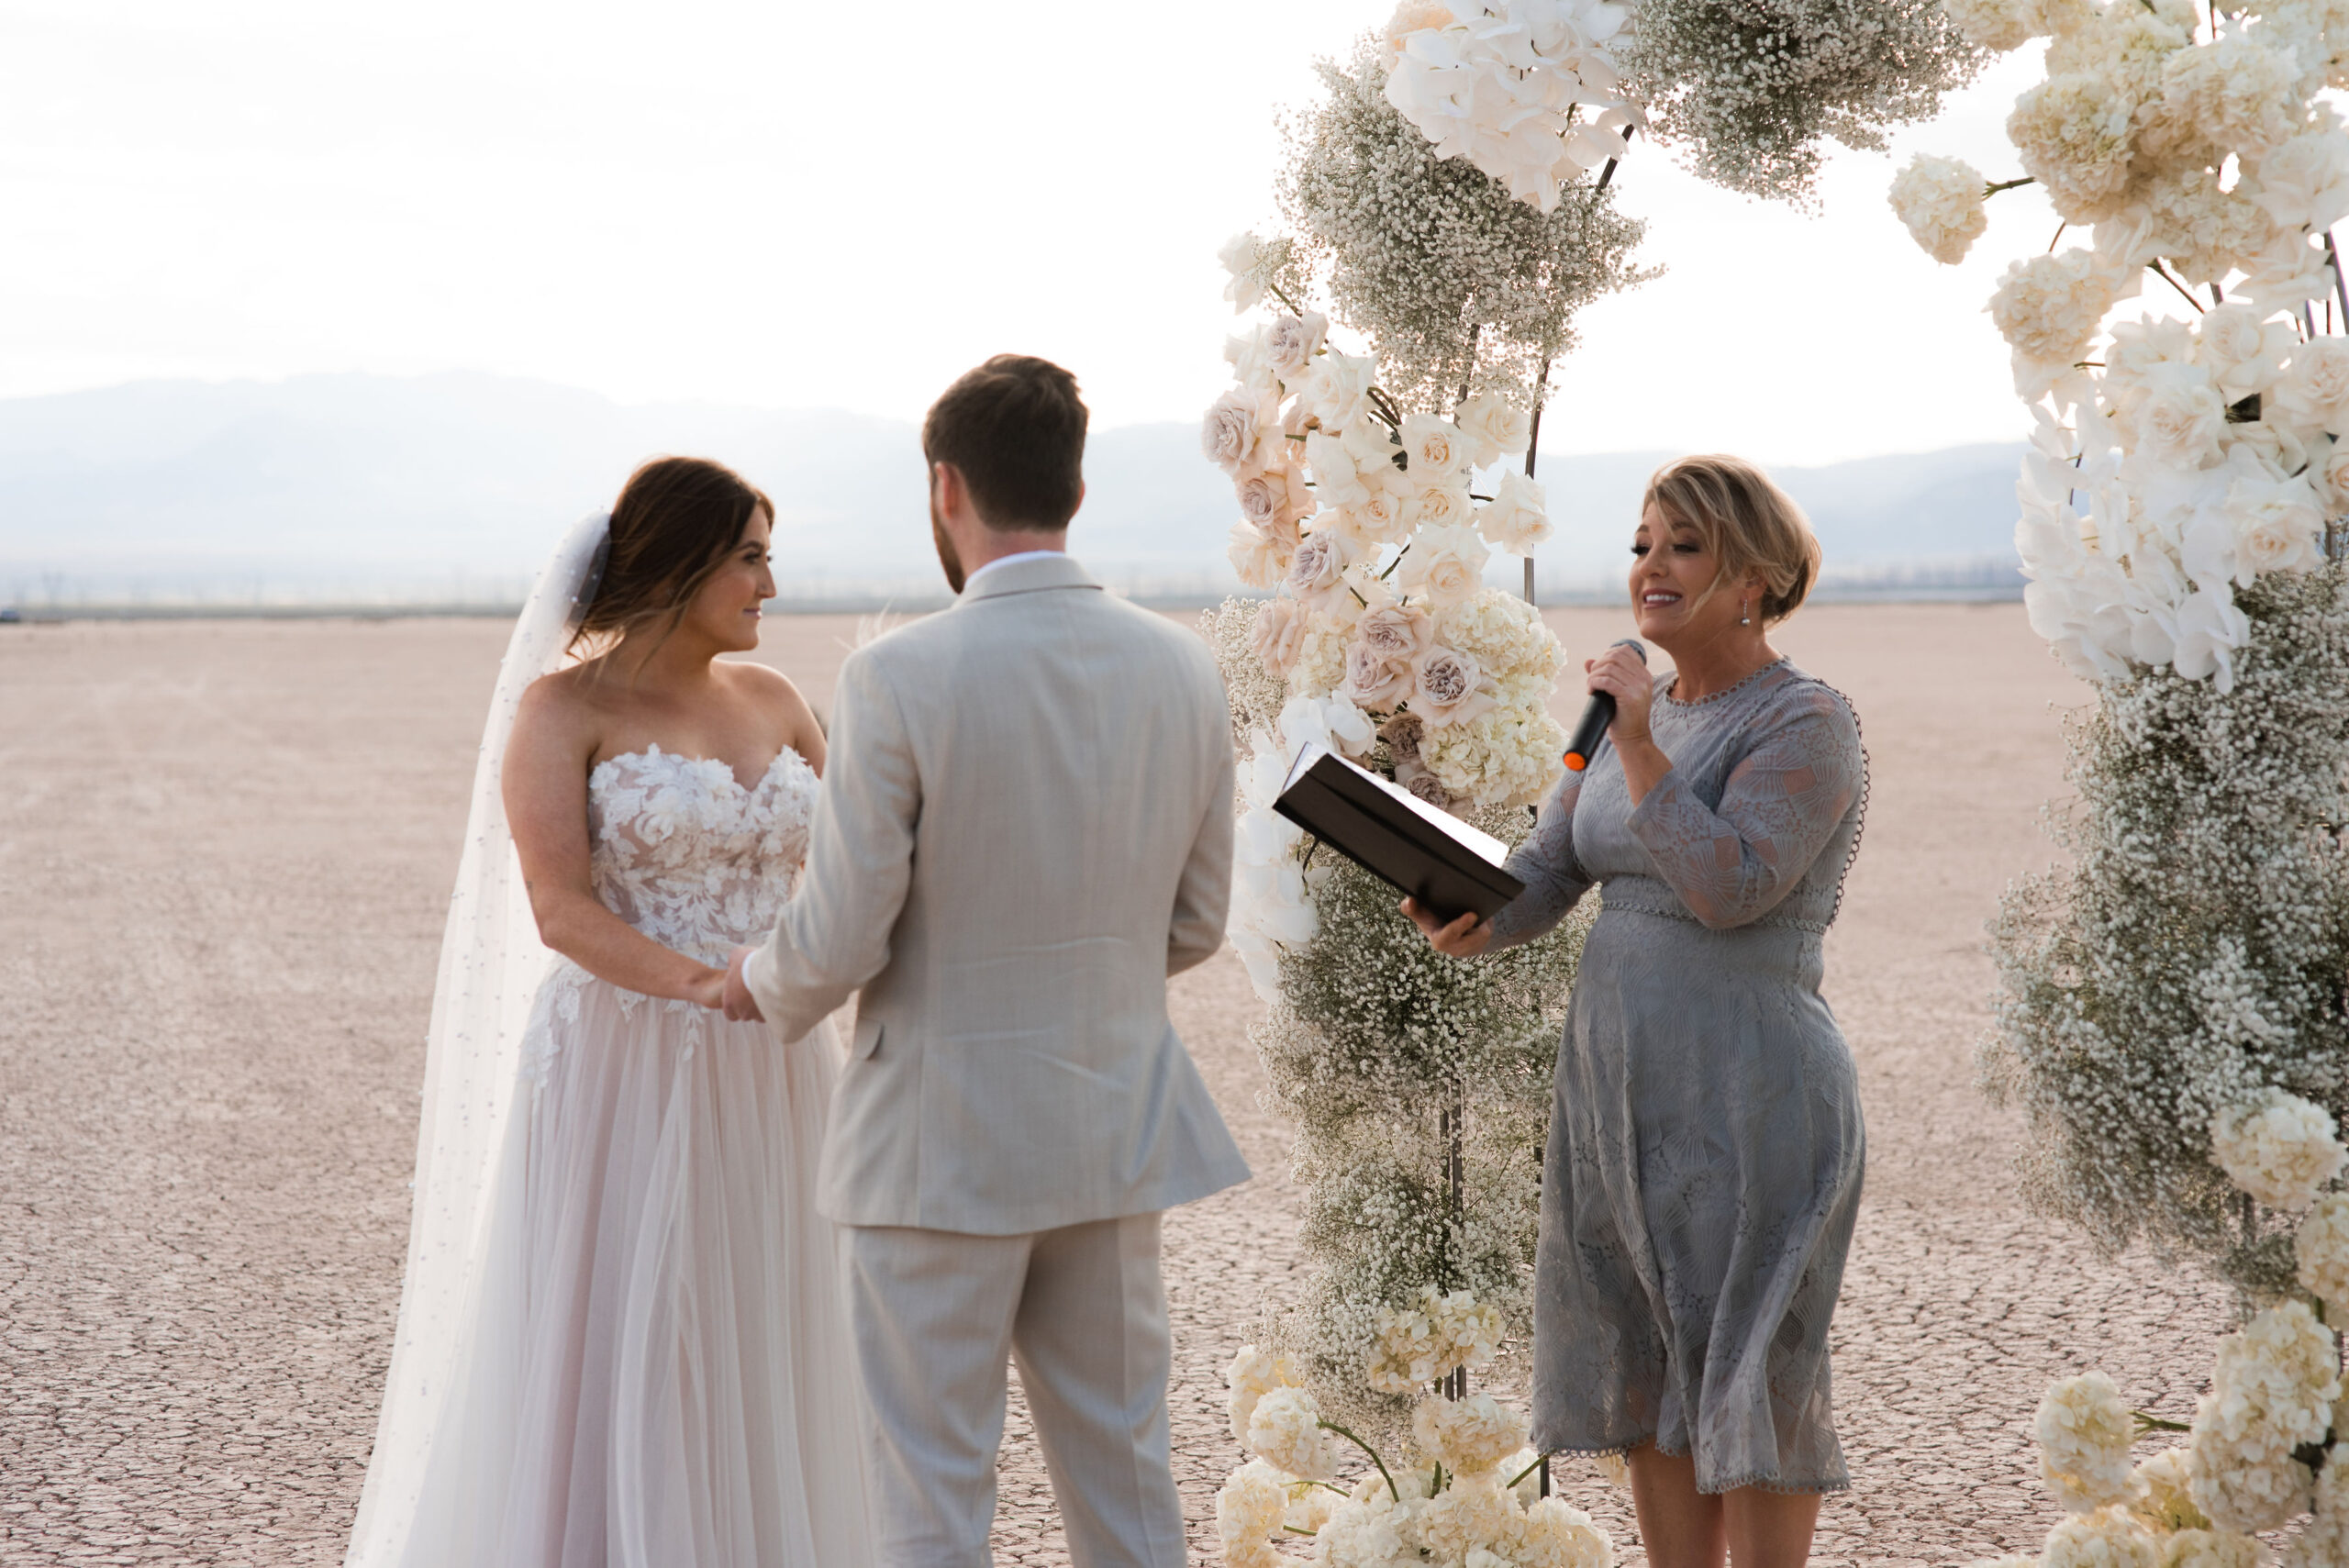 A couple holds hands during a wedding ceremony in a desert setting, officiated by a woman, under a floral arch at their Dry Lake Bed wedding